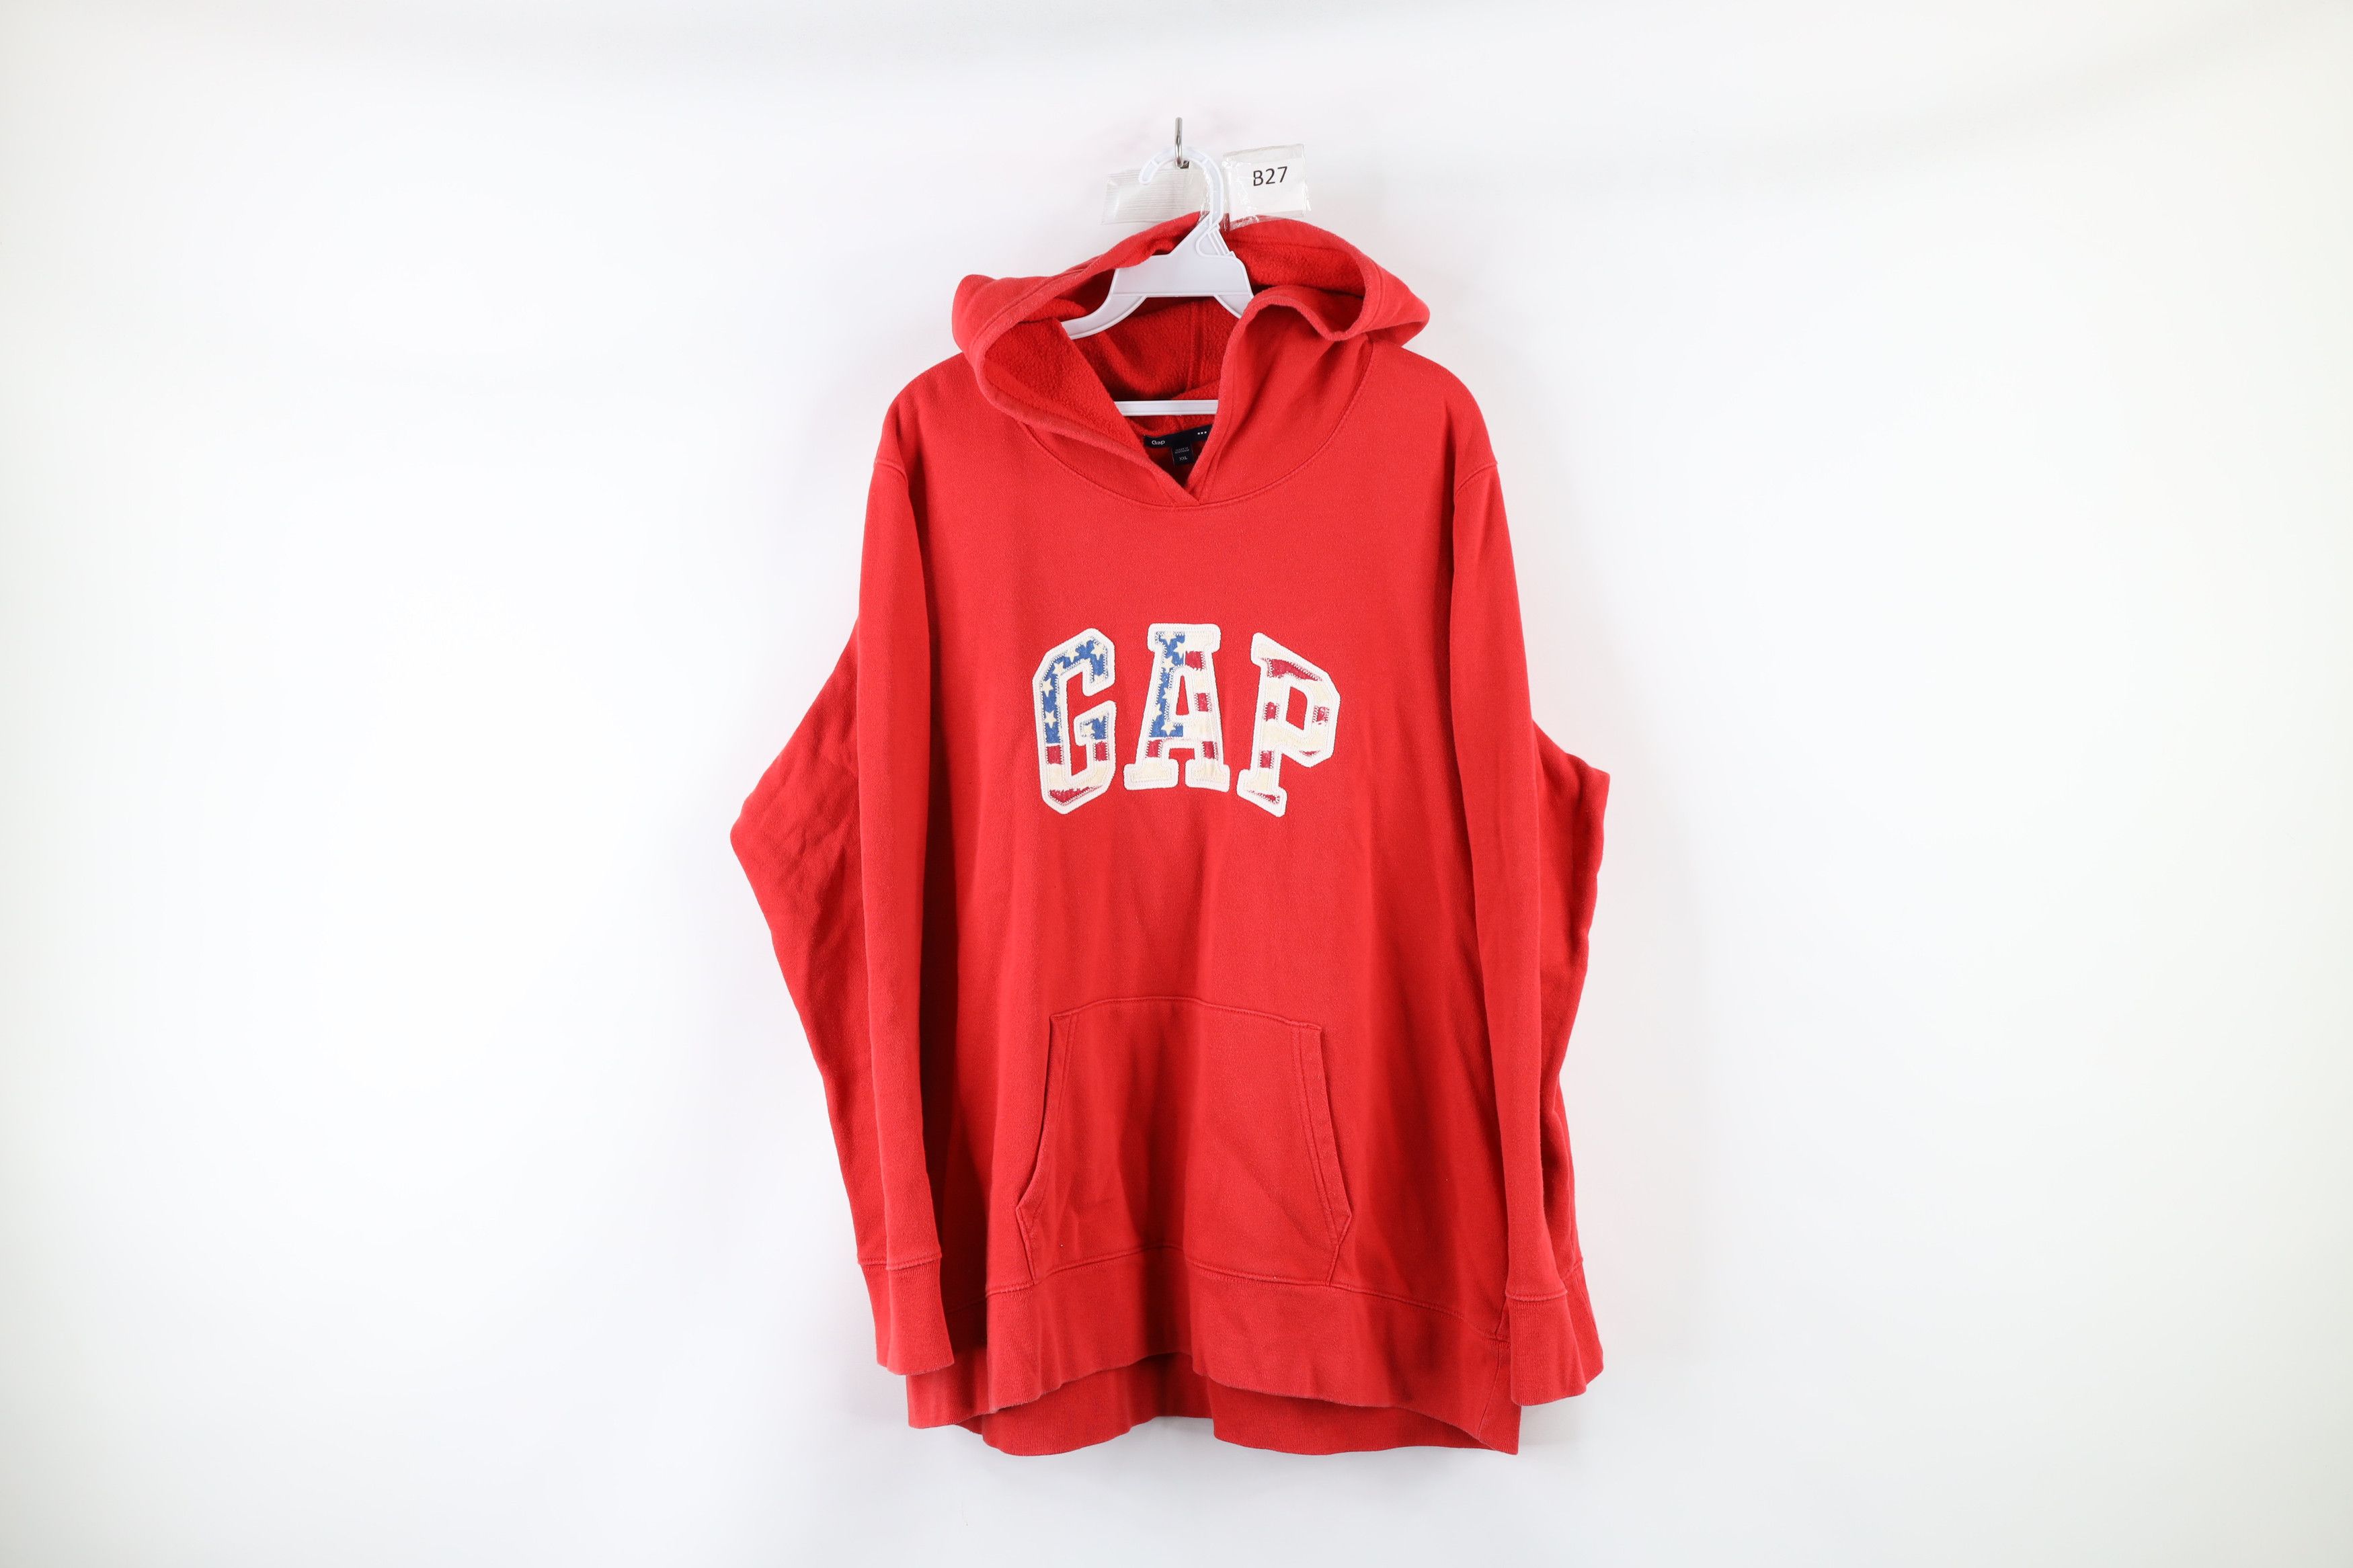 Vintage Vintage Gap Spell Out Block Letter Hoodie Sweatshirt Red Size US XXL / EU 58 / 5 - 1 Preview